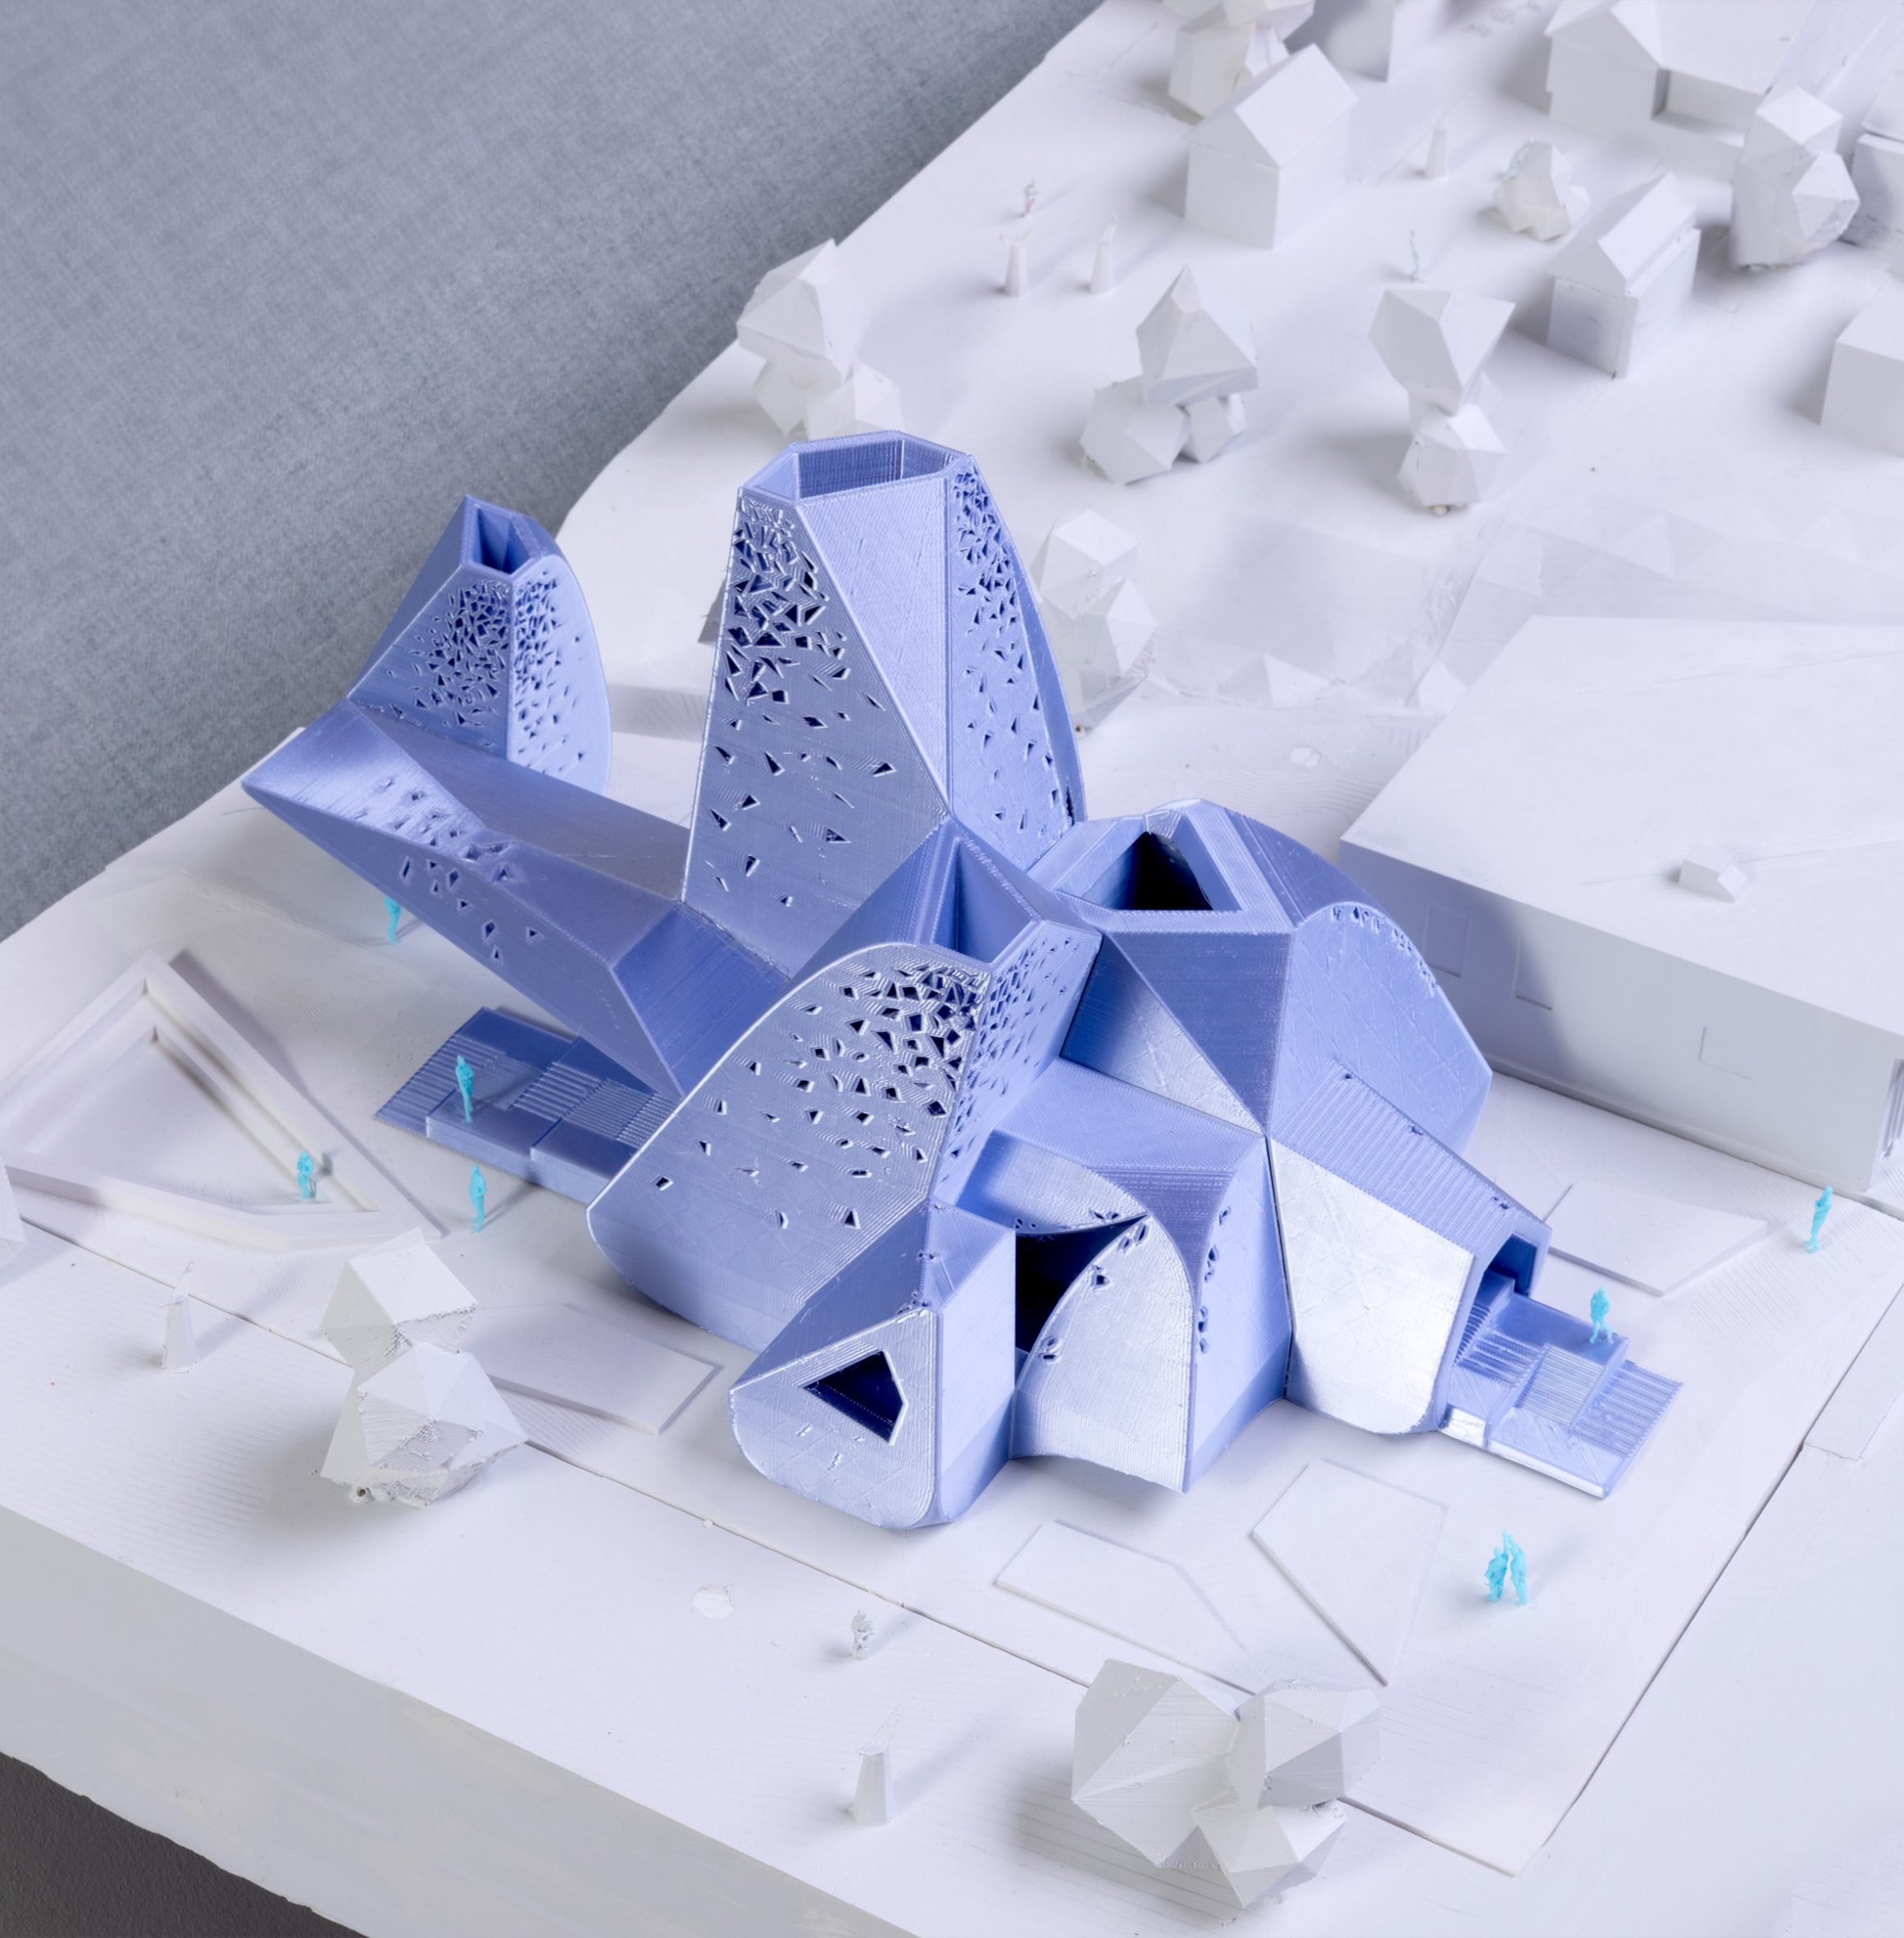 Student project at Texas A&M School of Architecture